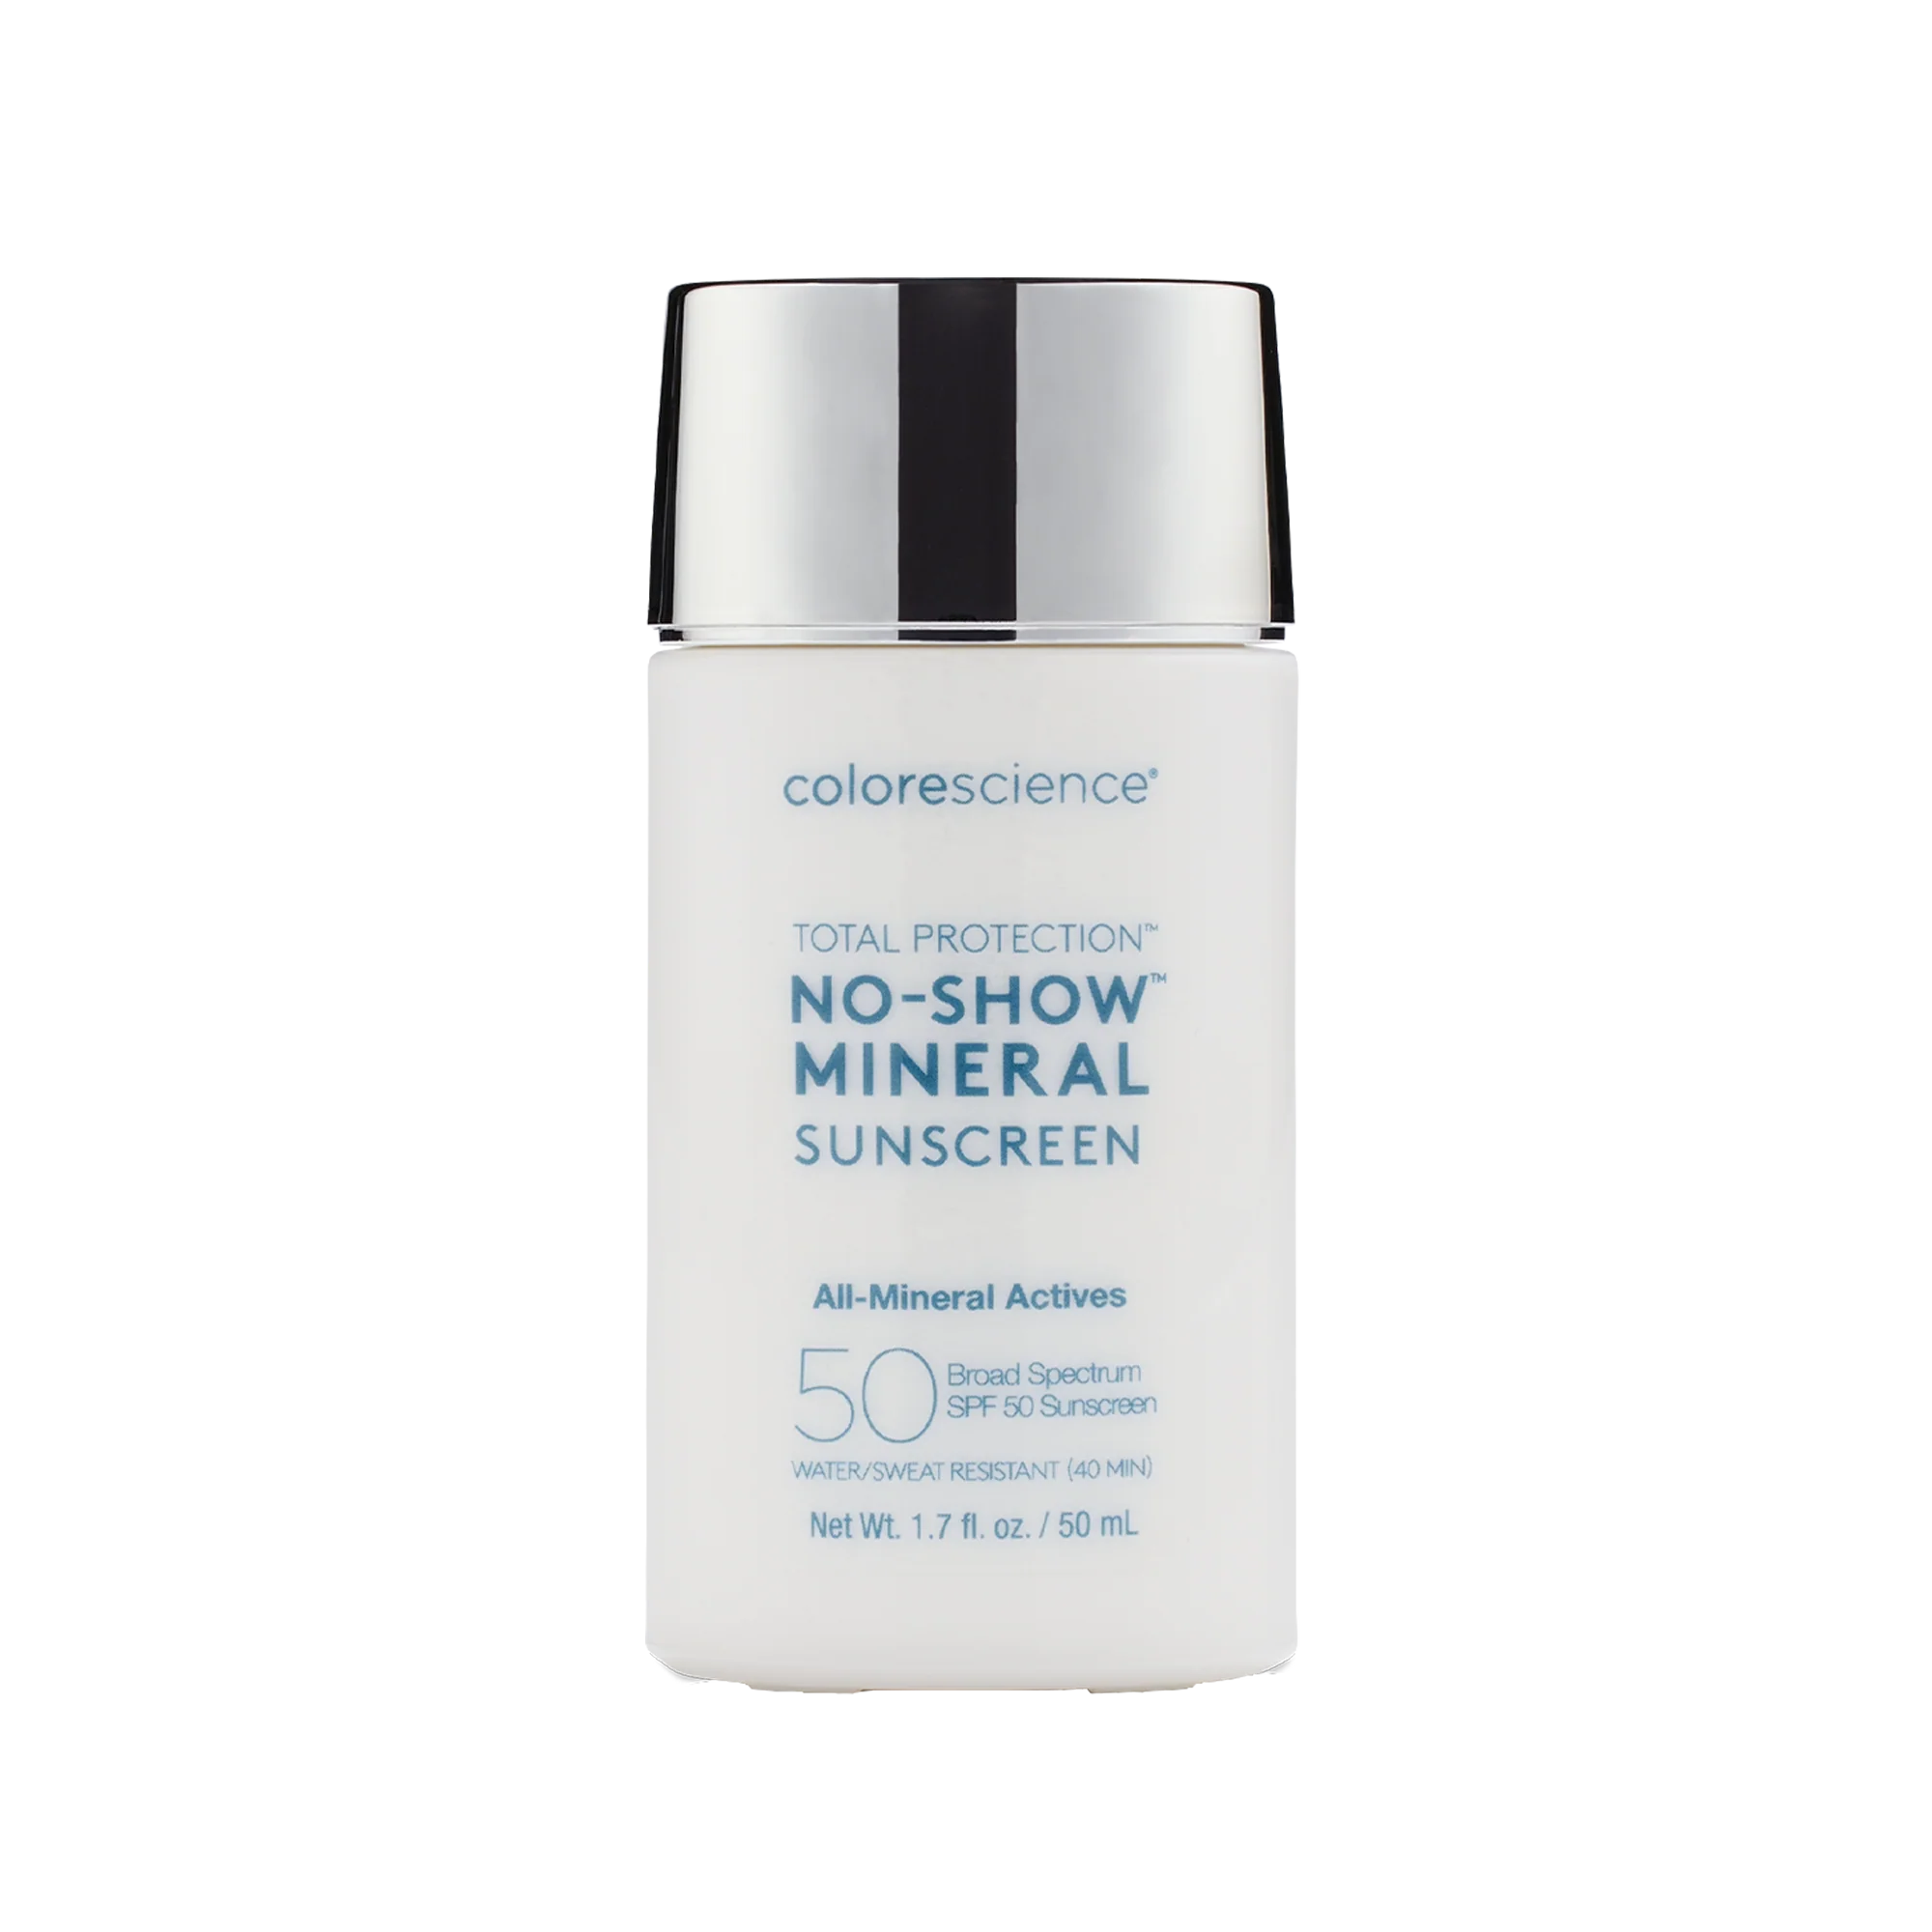 Total protection No show SPF 50 Mineral Sunscreen